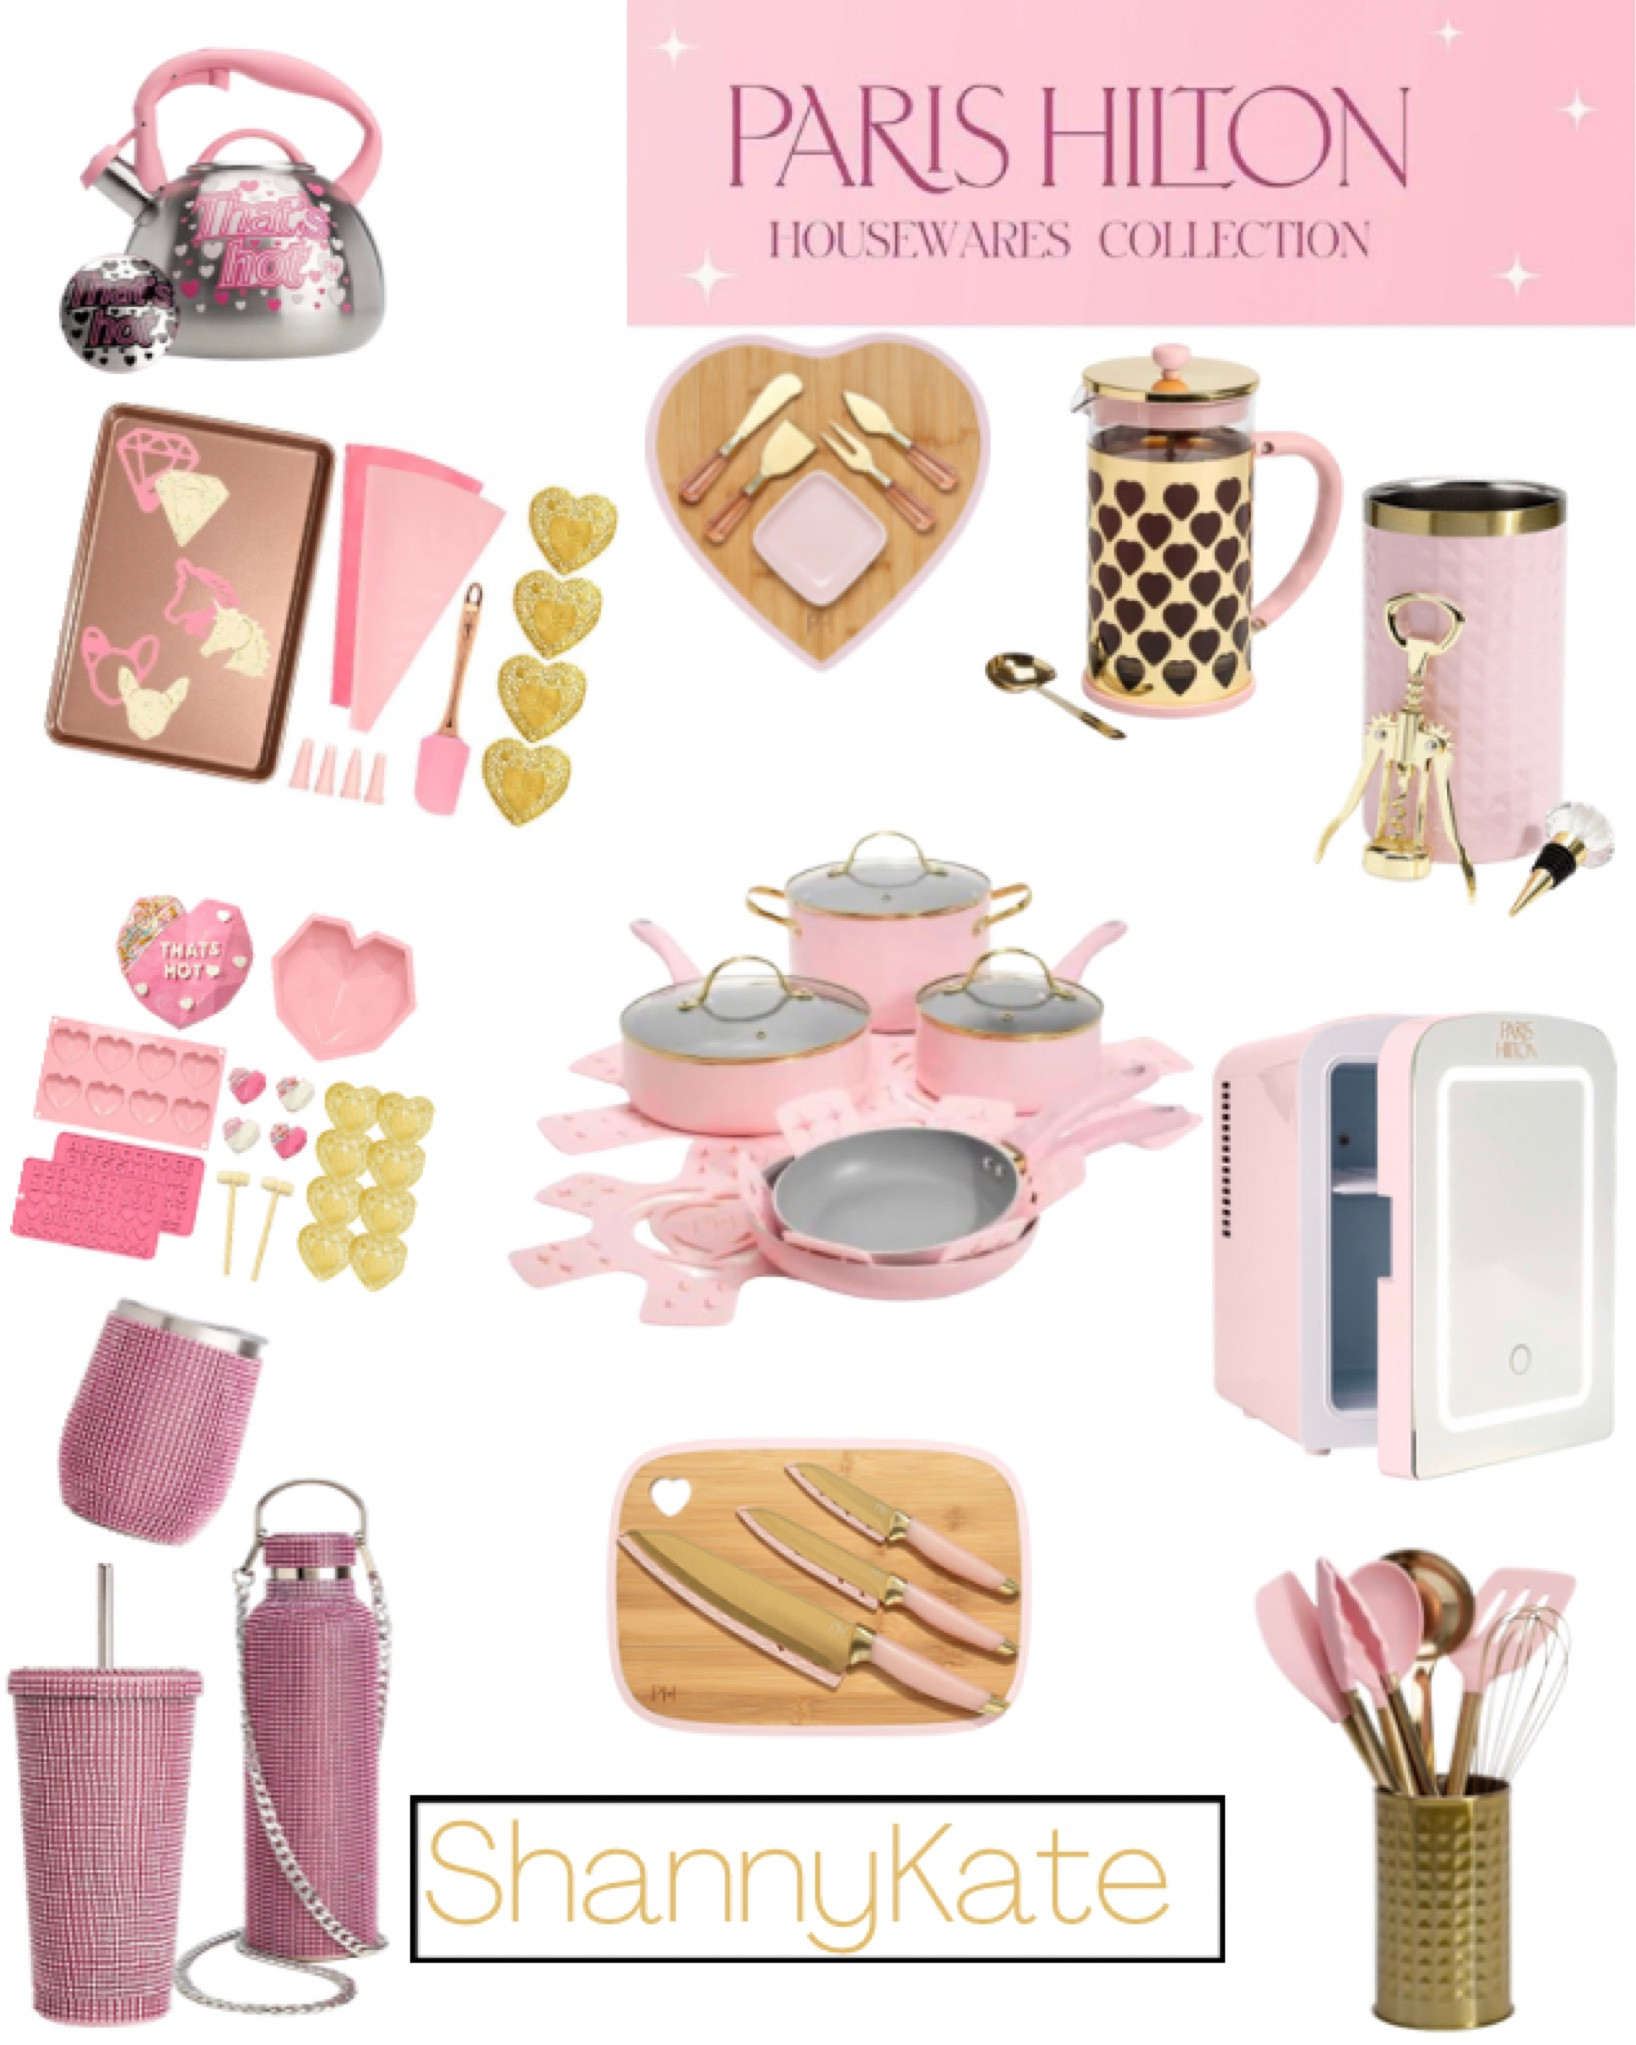 Paris Hilton Has a Housewares Collection on , and It's the Epitome of  'That's Hot